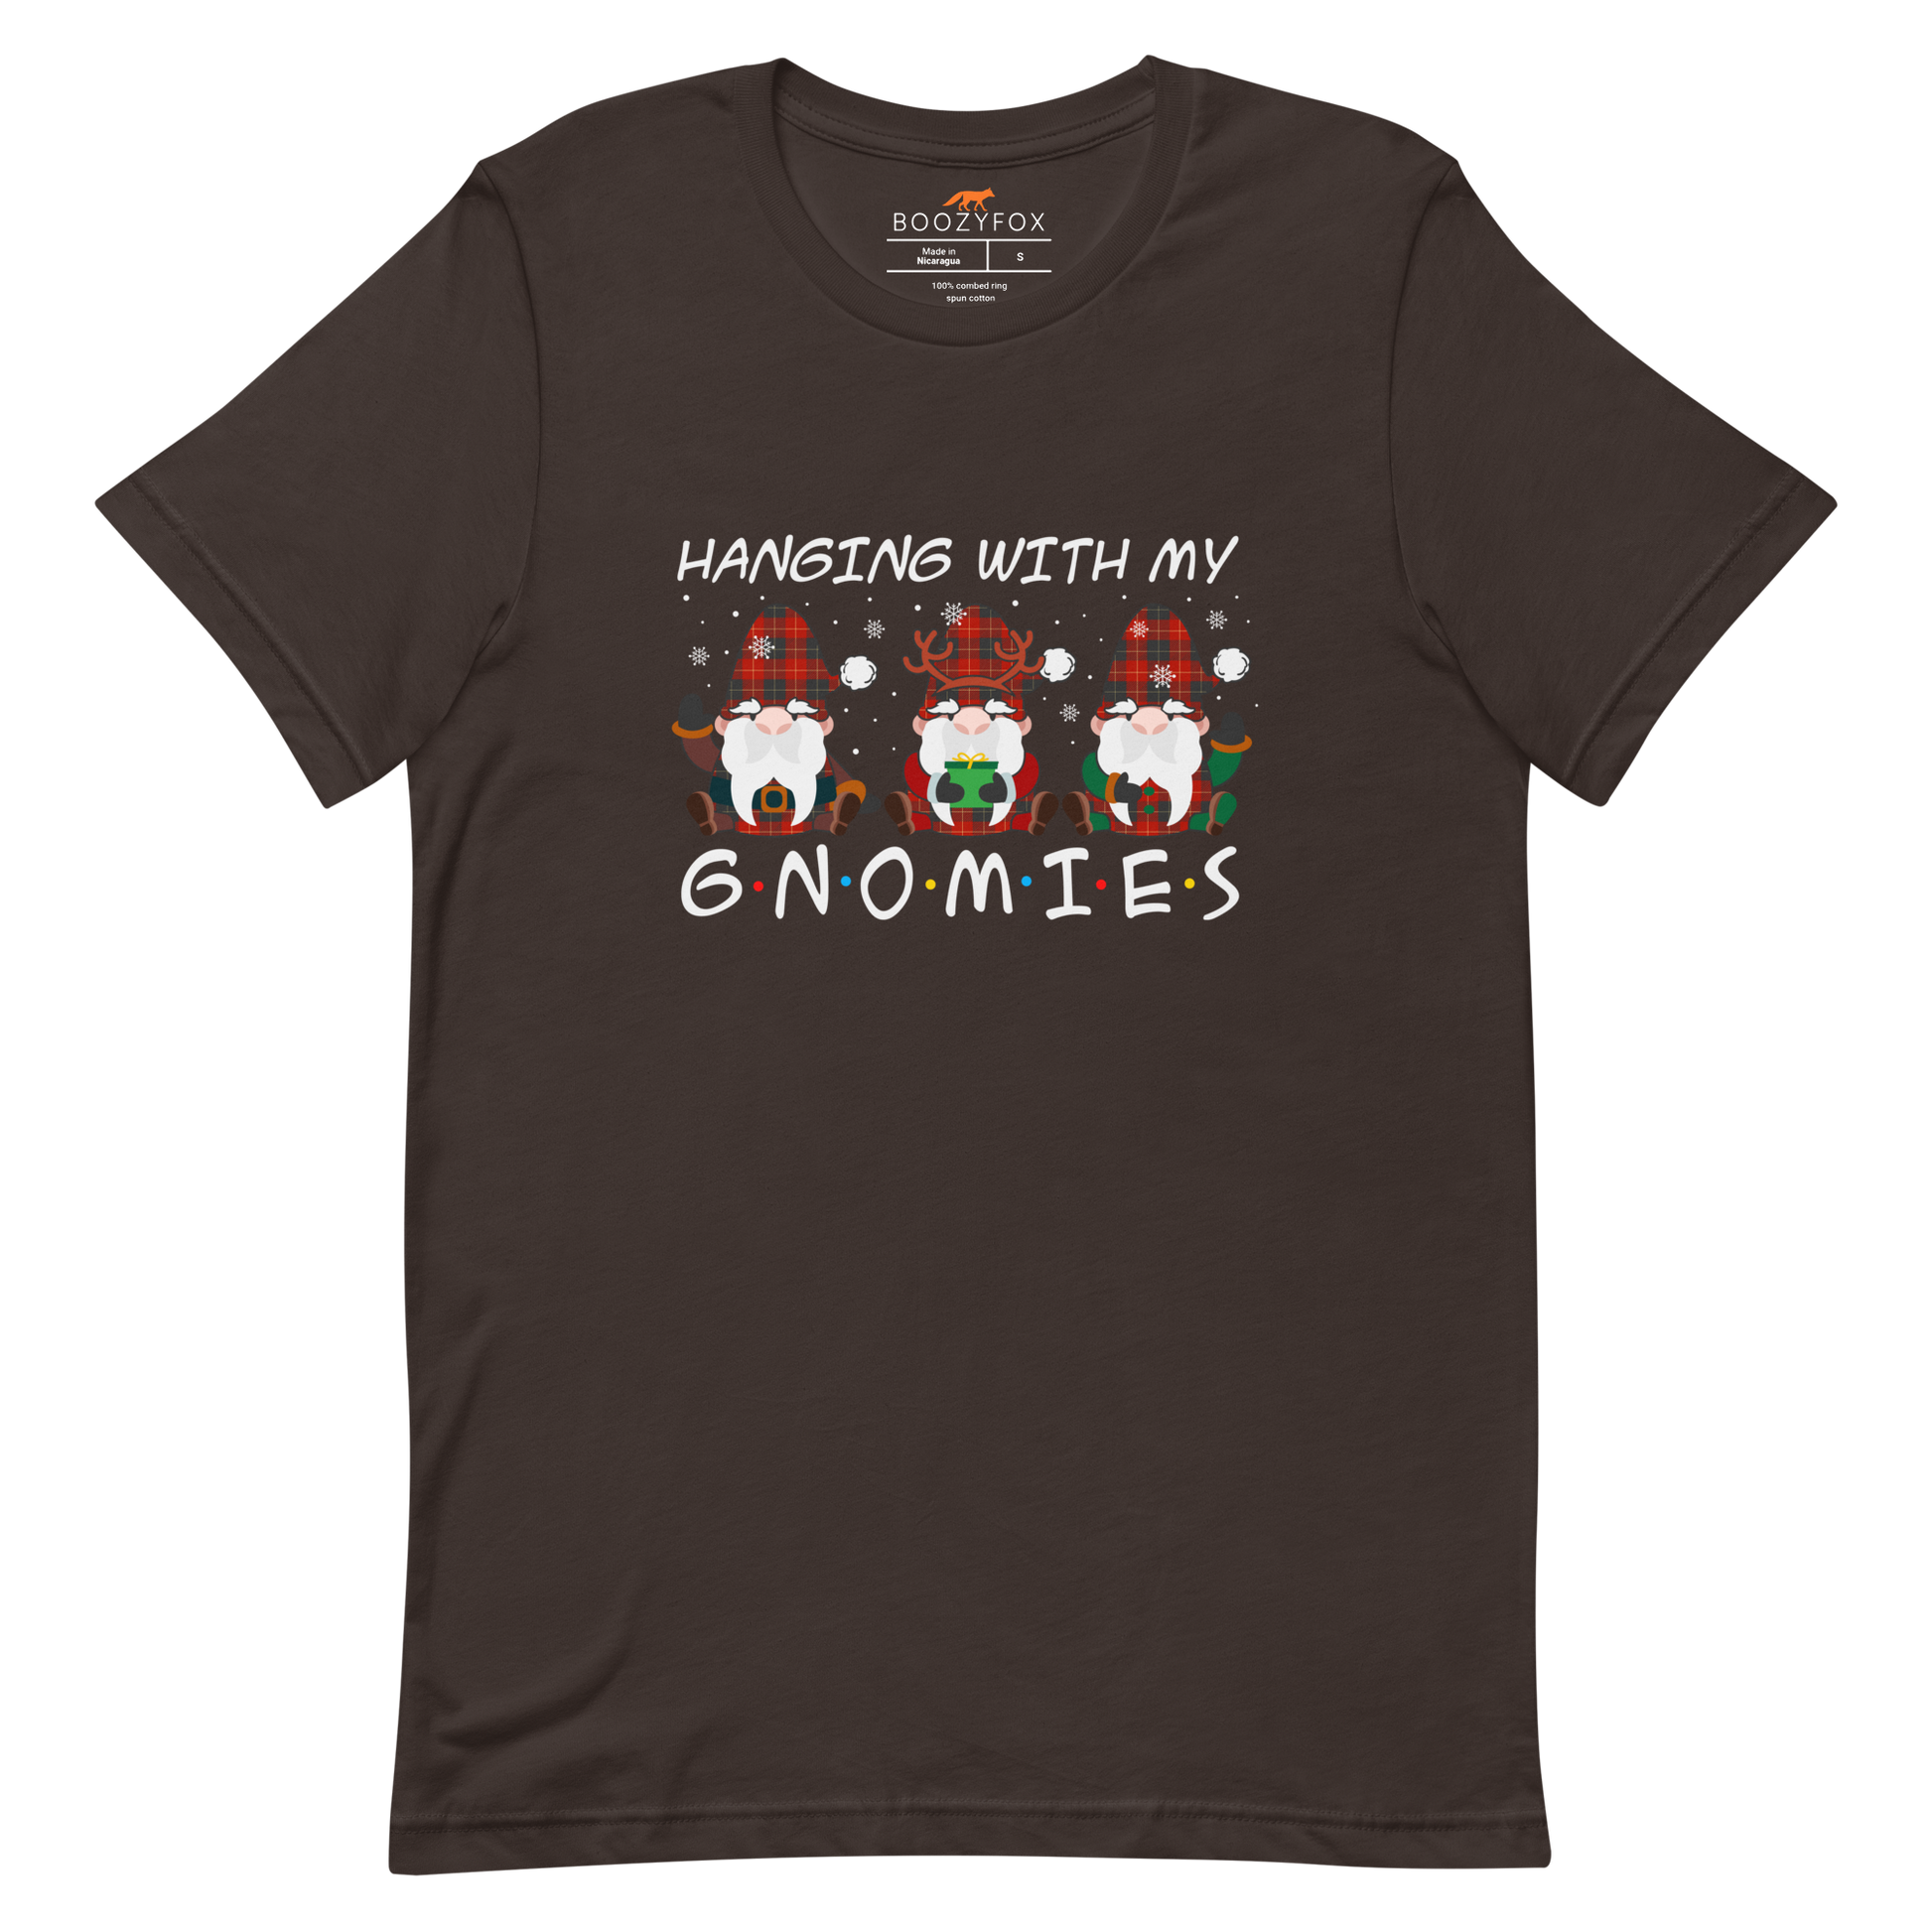 Brown Premium Christmas Gnome Tee featuring a delight Hanging With My Gnomies graphic on the chest - Funny Christmas Graphic Gnome Tees - Boozy Fox